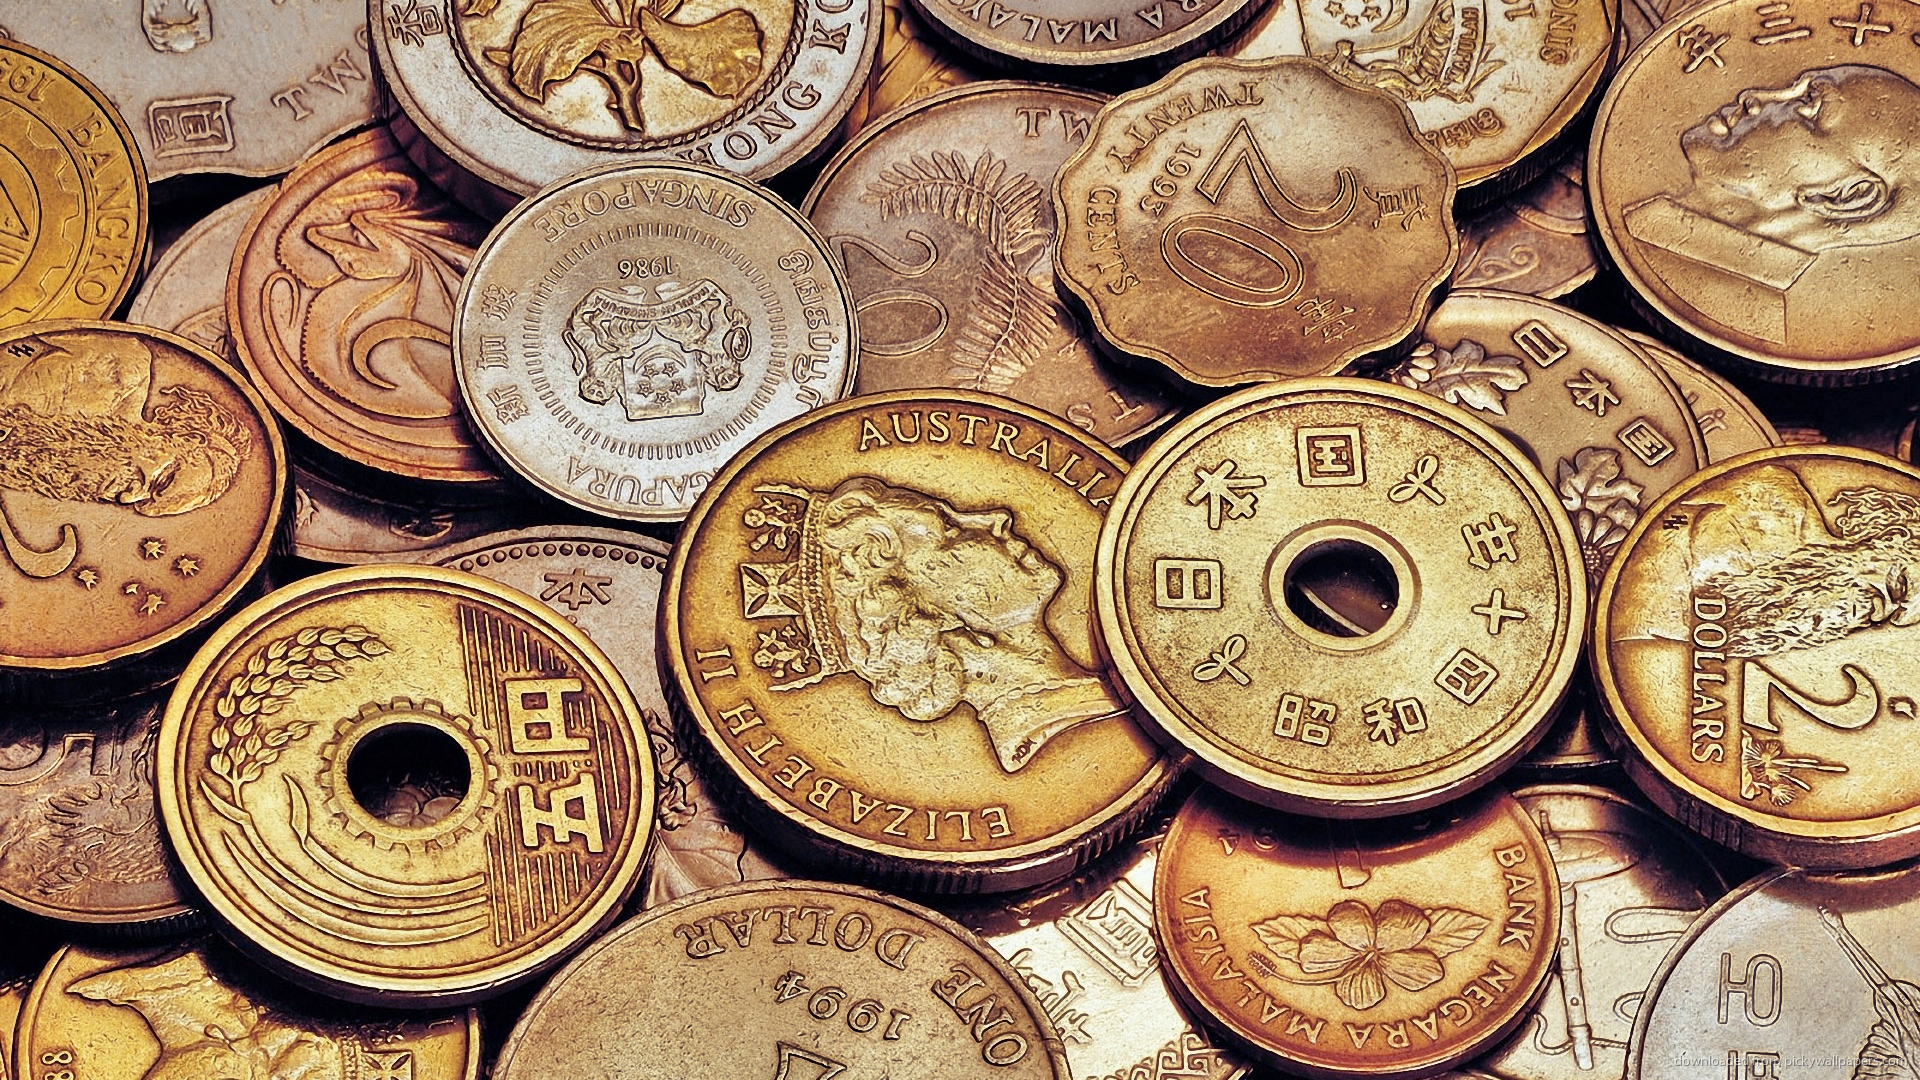 Chinese Coins Wallpapers, 46 Chinese Coins Images and Wallpapers for ...